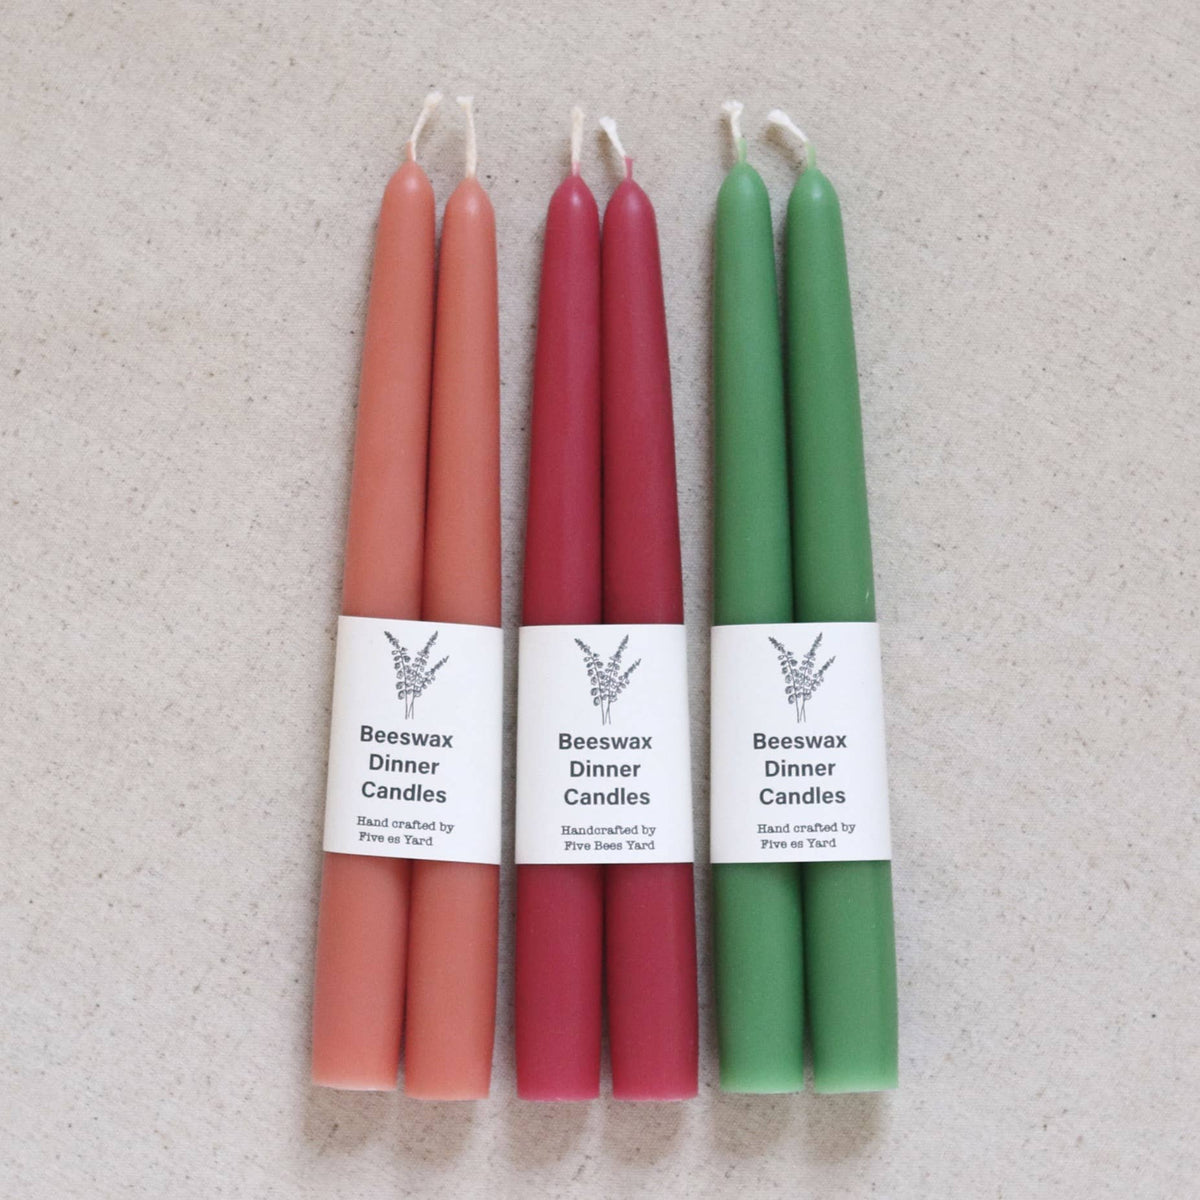 Five Bees Yard - Large Handmade Beeswax Dinner Candles | Taper | Non Dripping